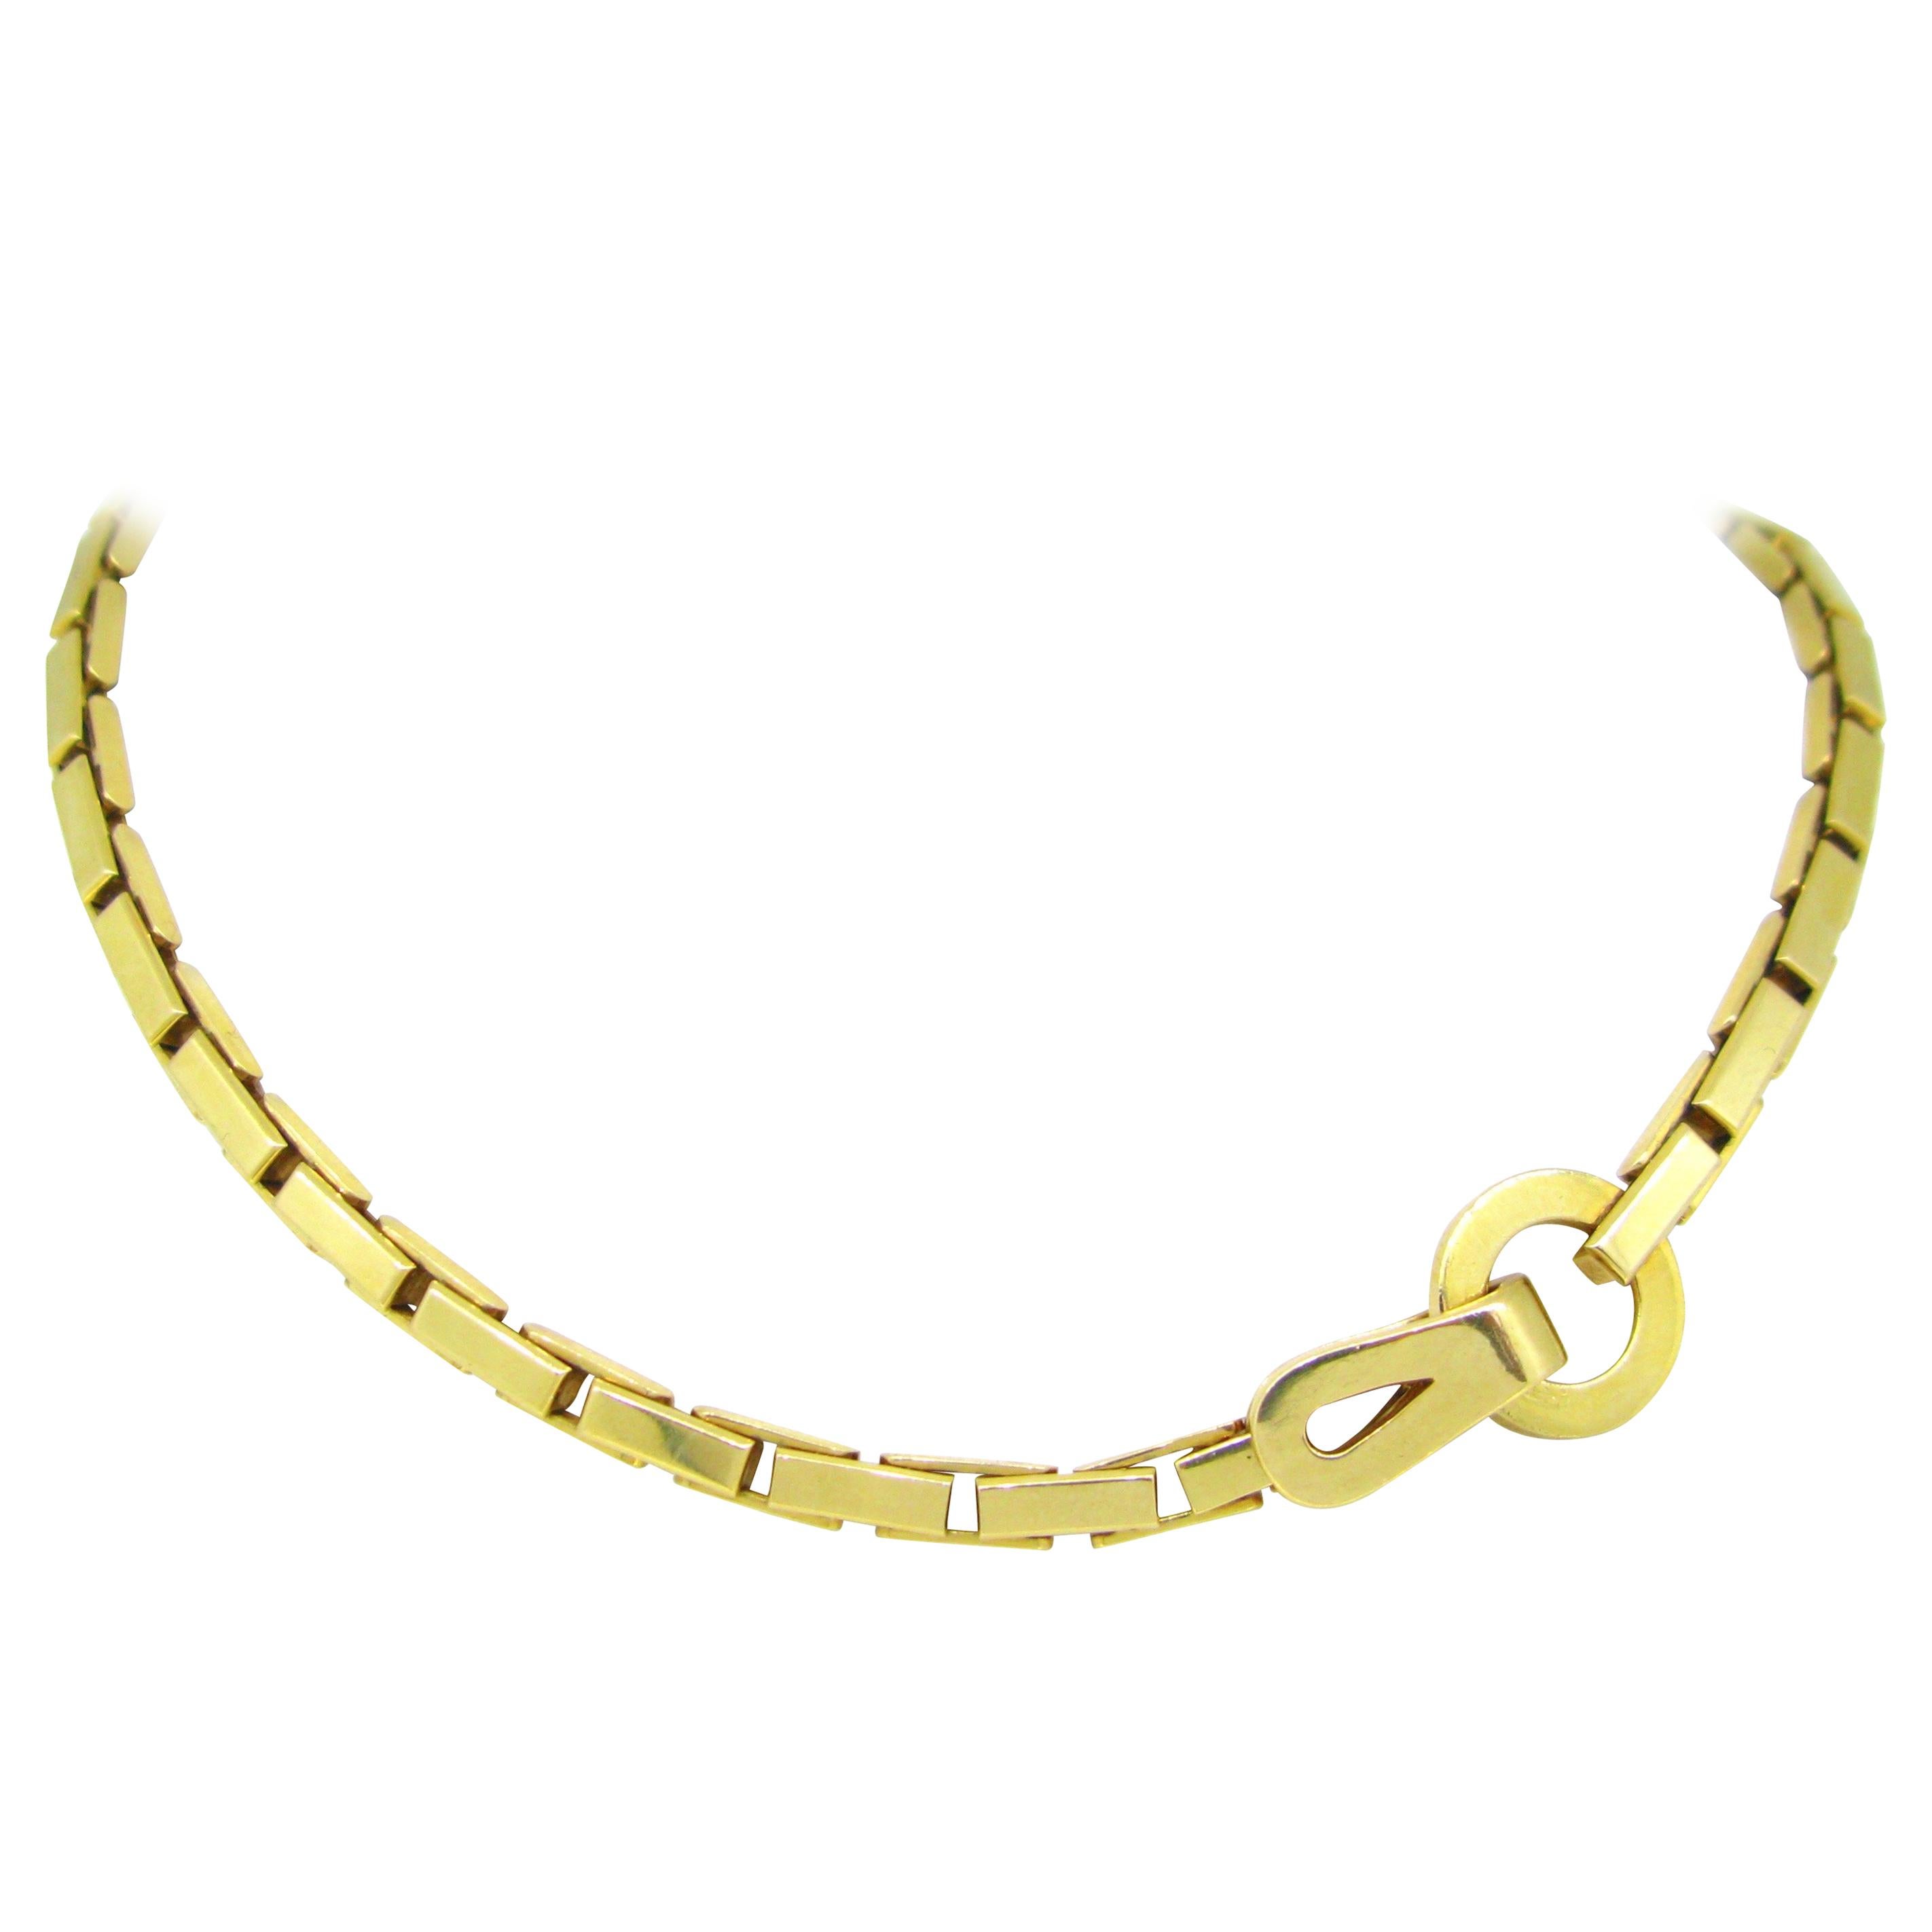 Cartier Agrafe Yellow Gold Collar Link Necklace